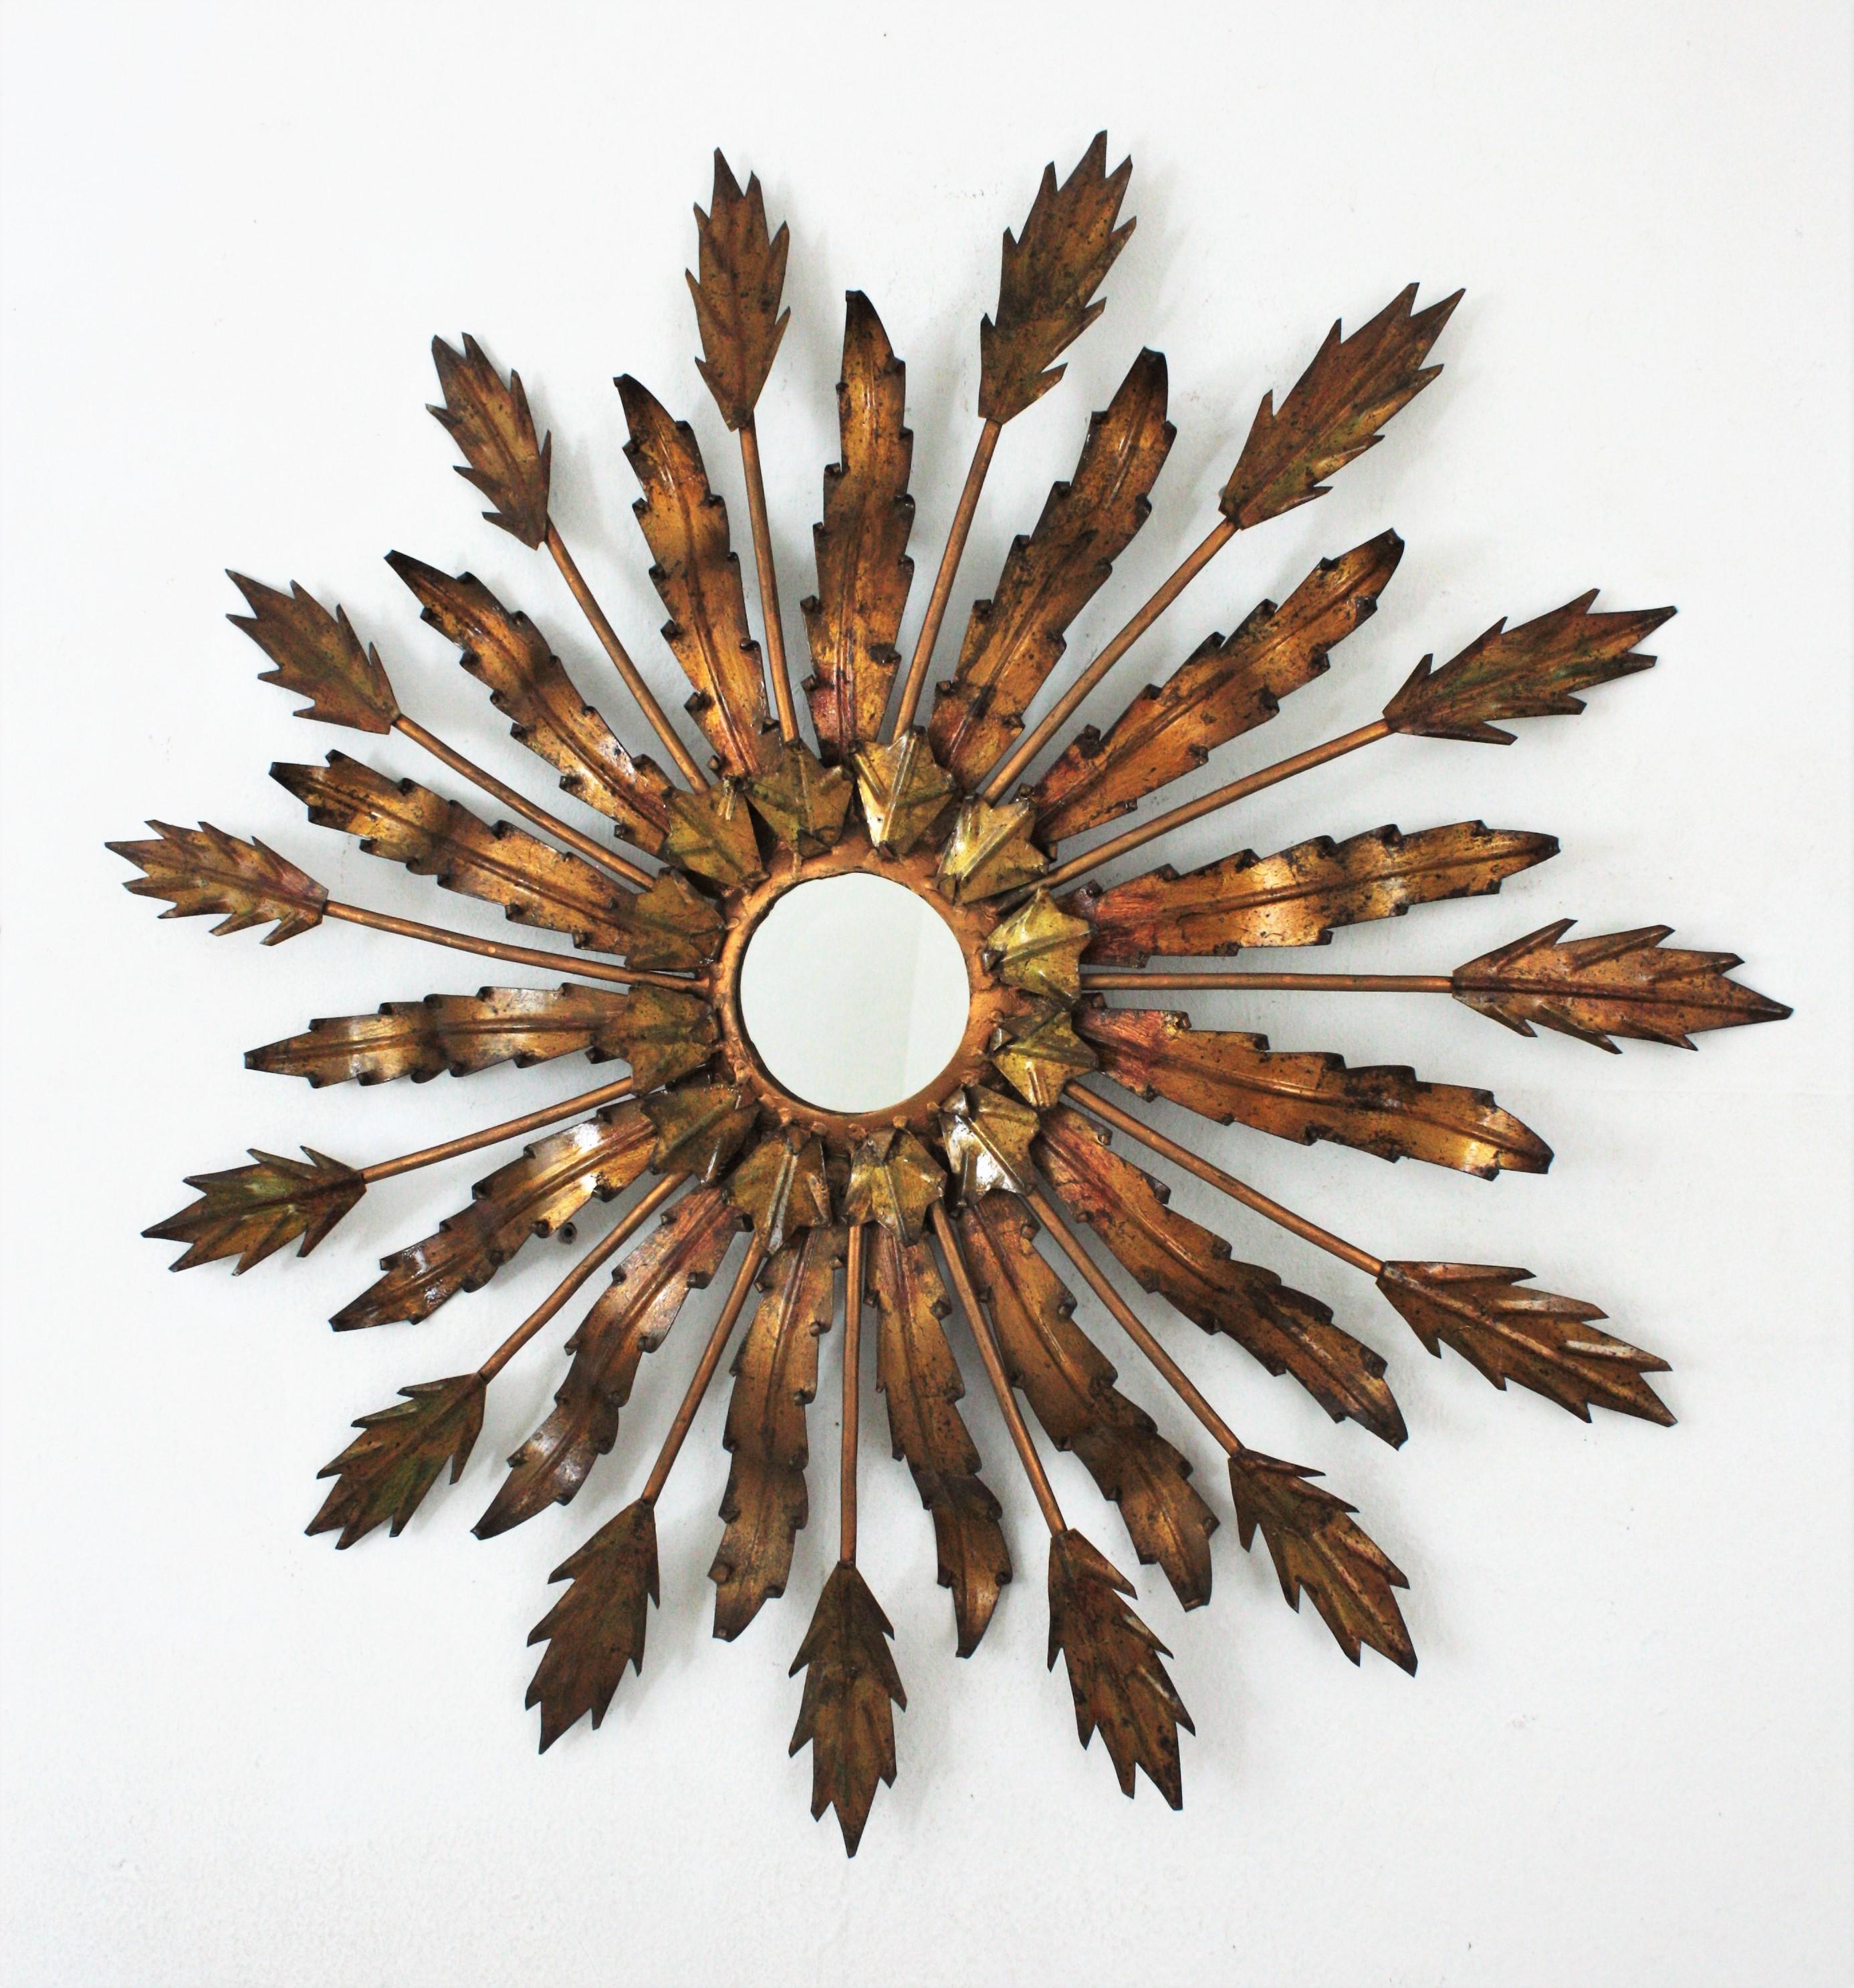 A beautiful Brutalist hand-hammered gilt iron sunburst mirror with leafed design, France, 1950s.
Alternating leaves with different shapes surrounding a small corolla around the glass.
It has a dramatic aged patina in bronze-gold gilt iron with softs